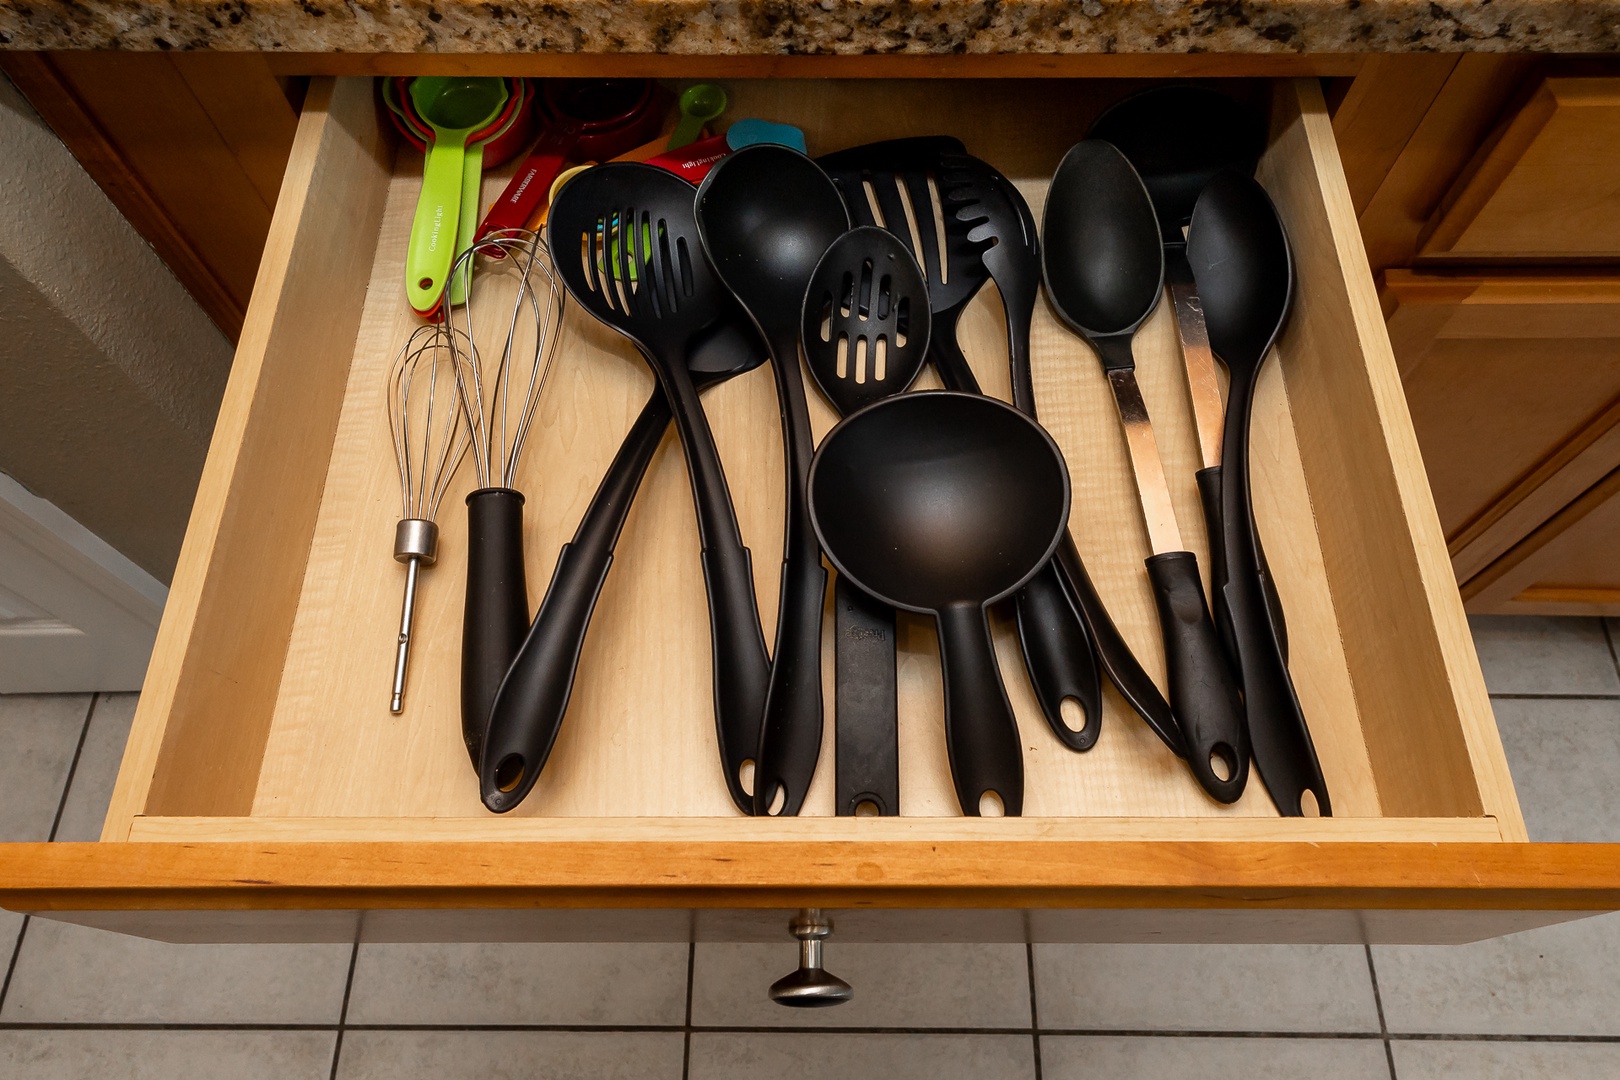 No need to pack the dishes & cookware for your visit!